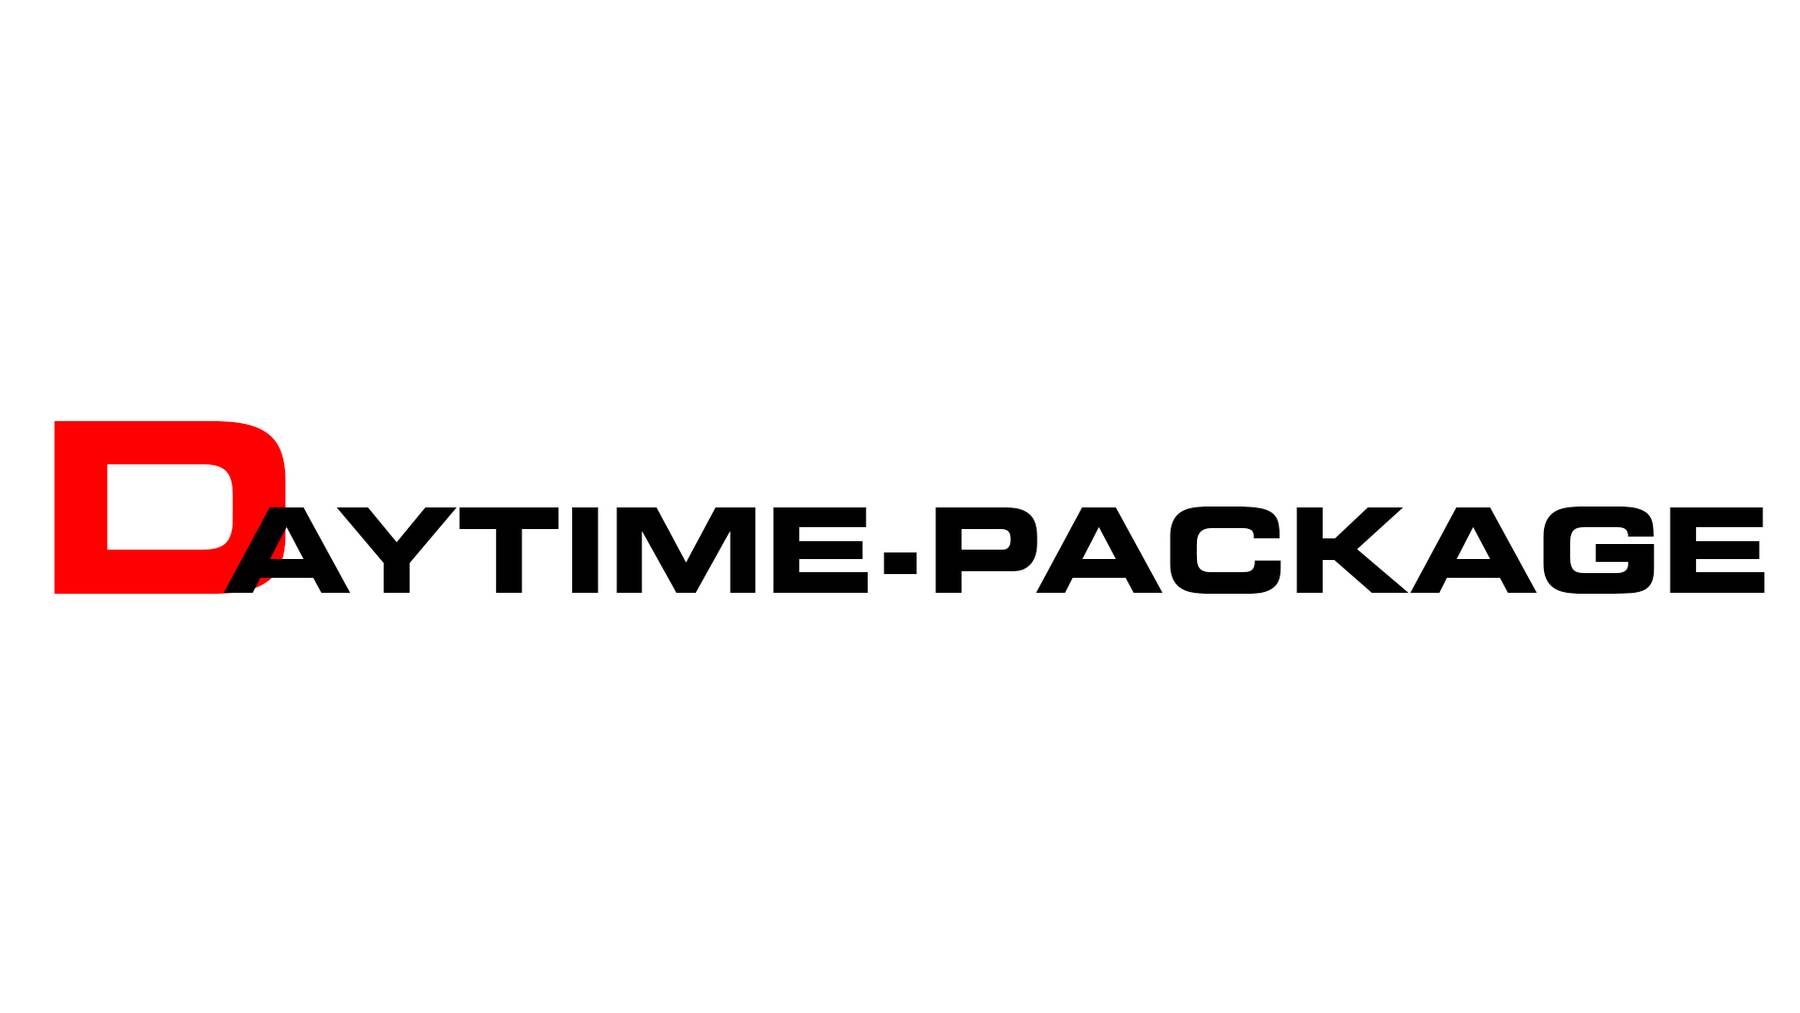 Daytime-package_2